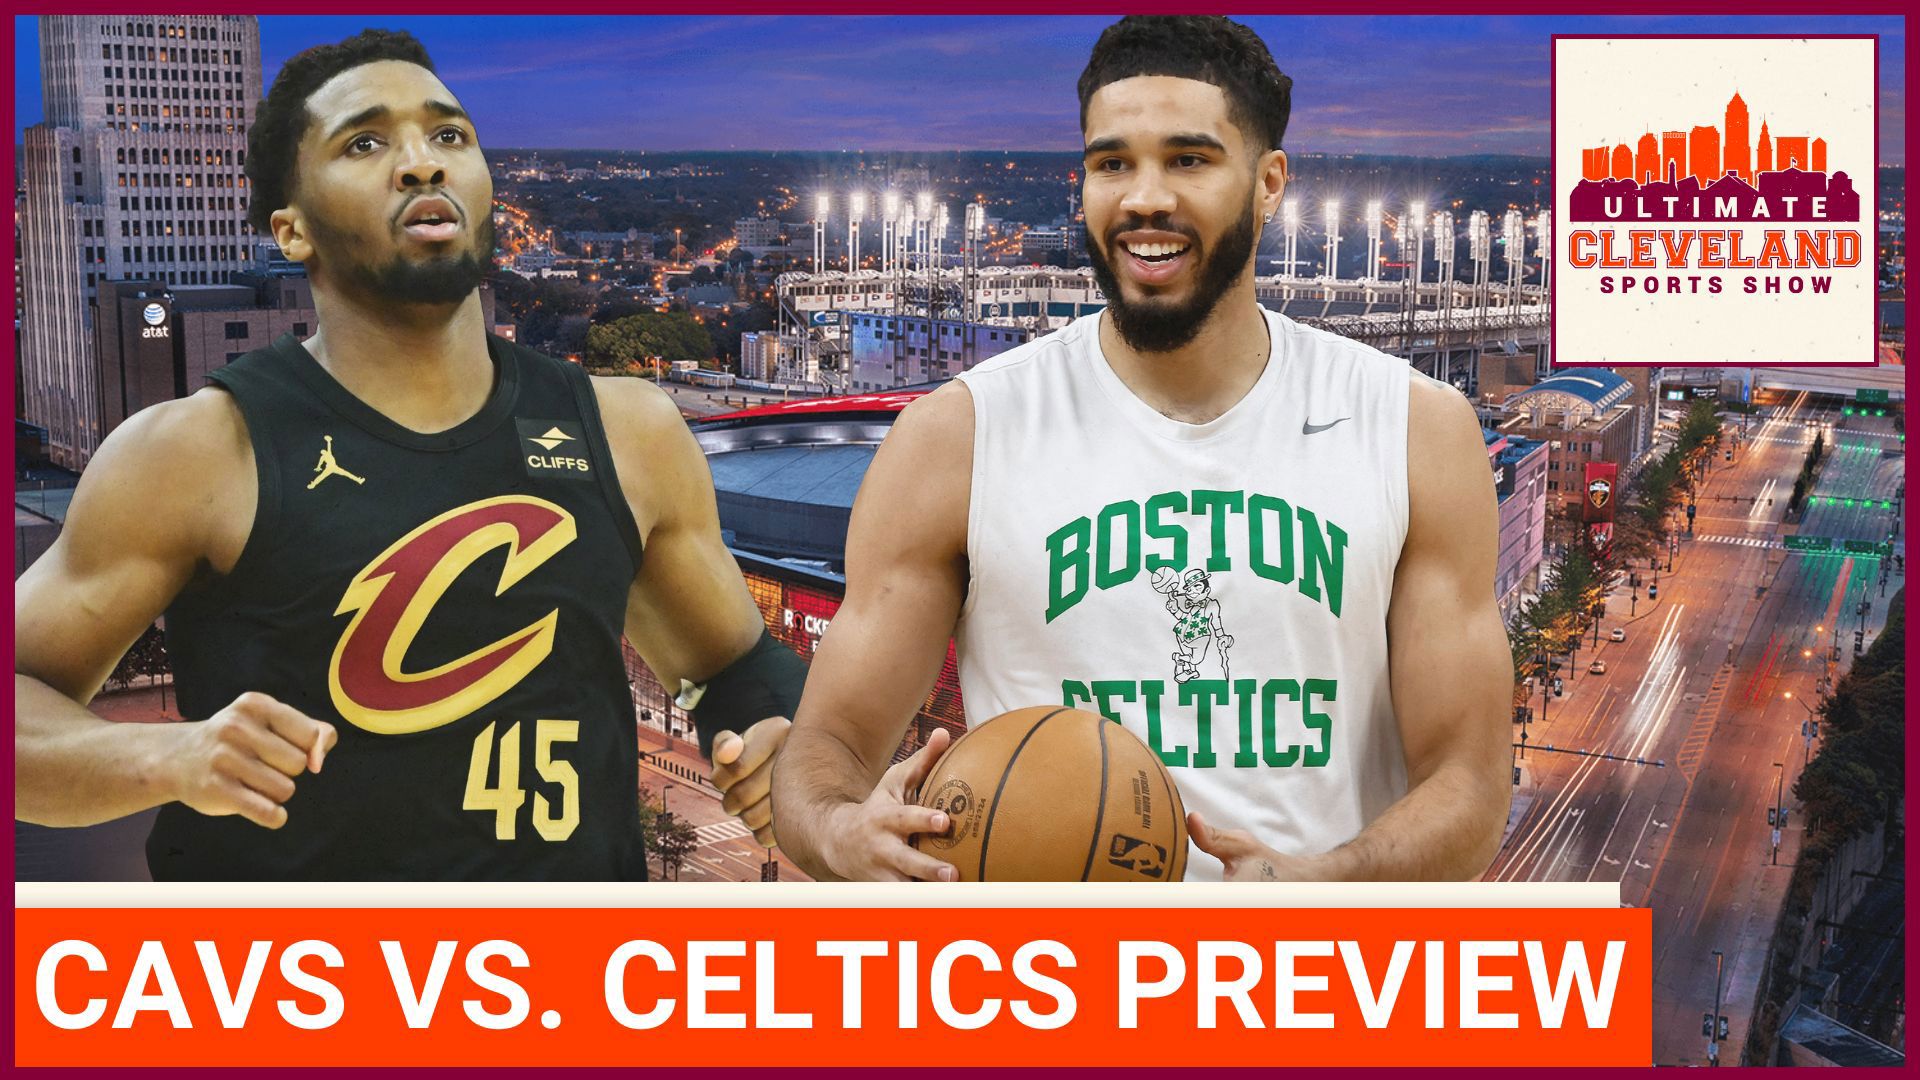 Cleveland Cavaliers take on the Boston Celtics in the eastern conference semi finals. What is the key to the Cavs winning this series?